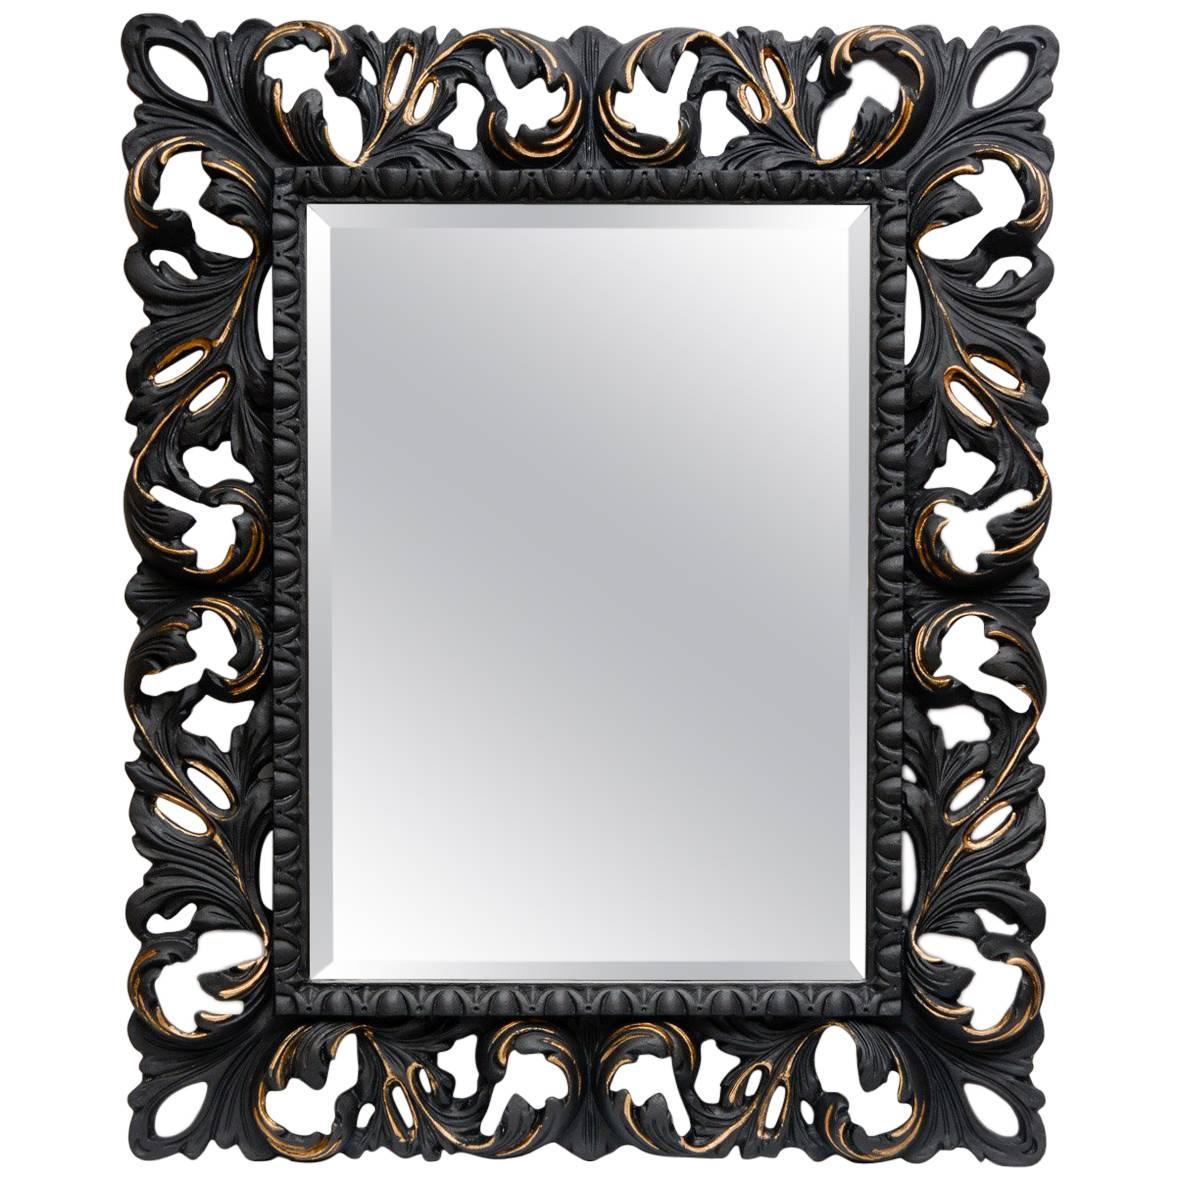 Mirror Surrounding by Wood in the Style of Napoleon III